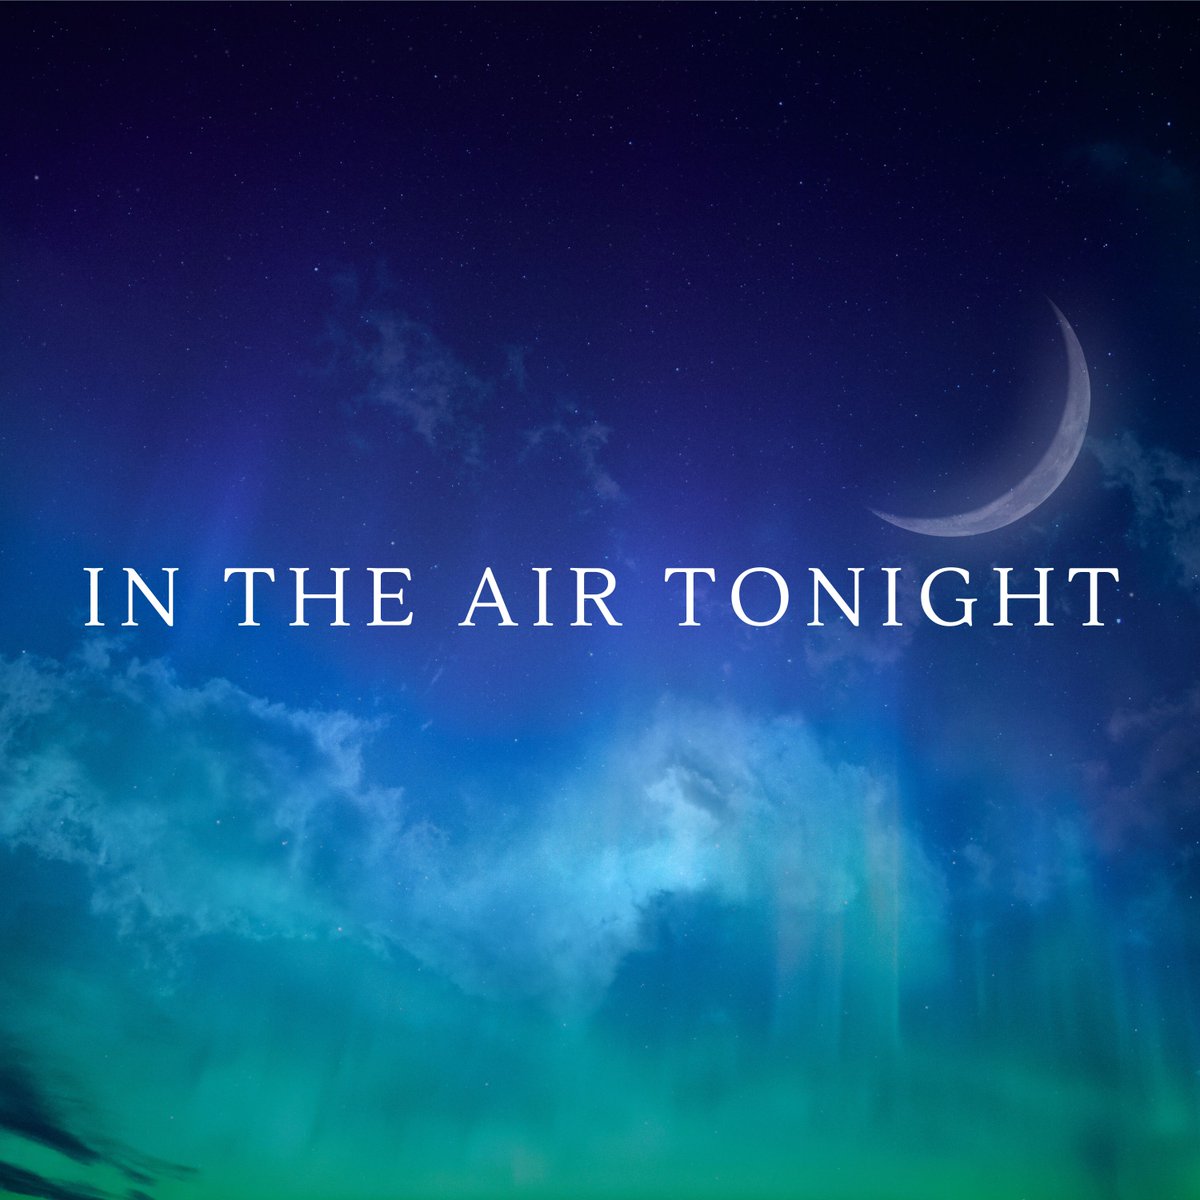 Fan of Phil Collin's 'In the Air Tonight'? - My acoustic version is out now on all platforms! :) rfr.bz/t9j645z What cover should I do next?? #coversong #cover #acousticversion #acousticcover